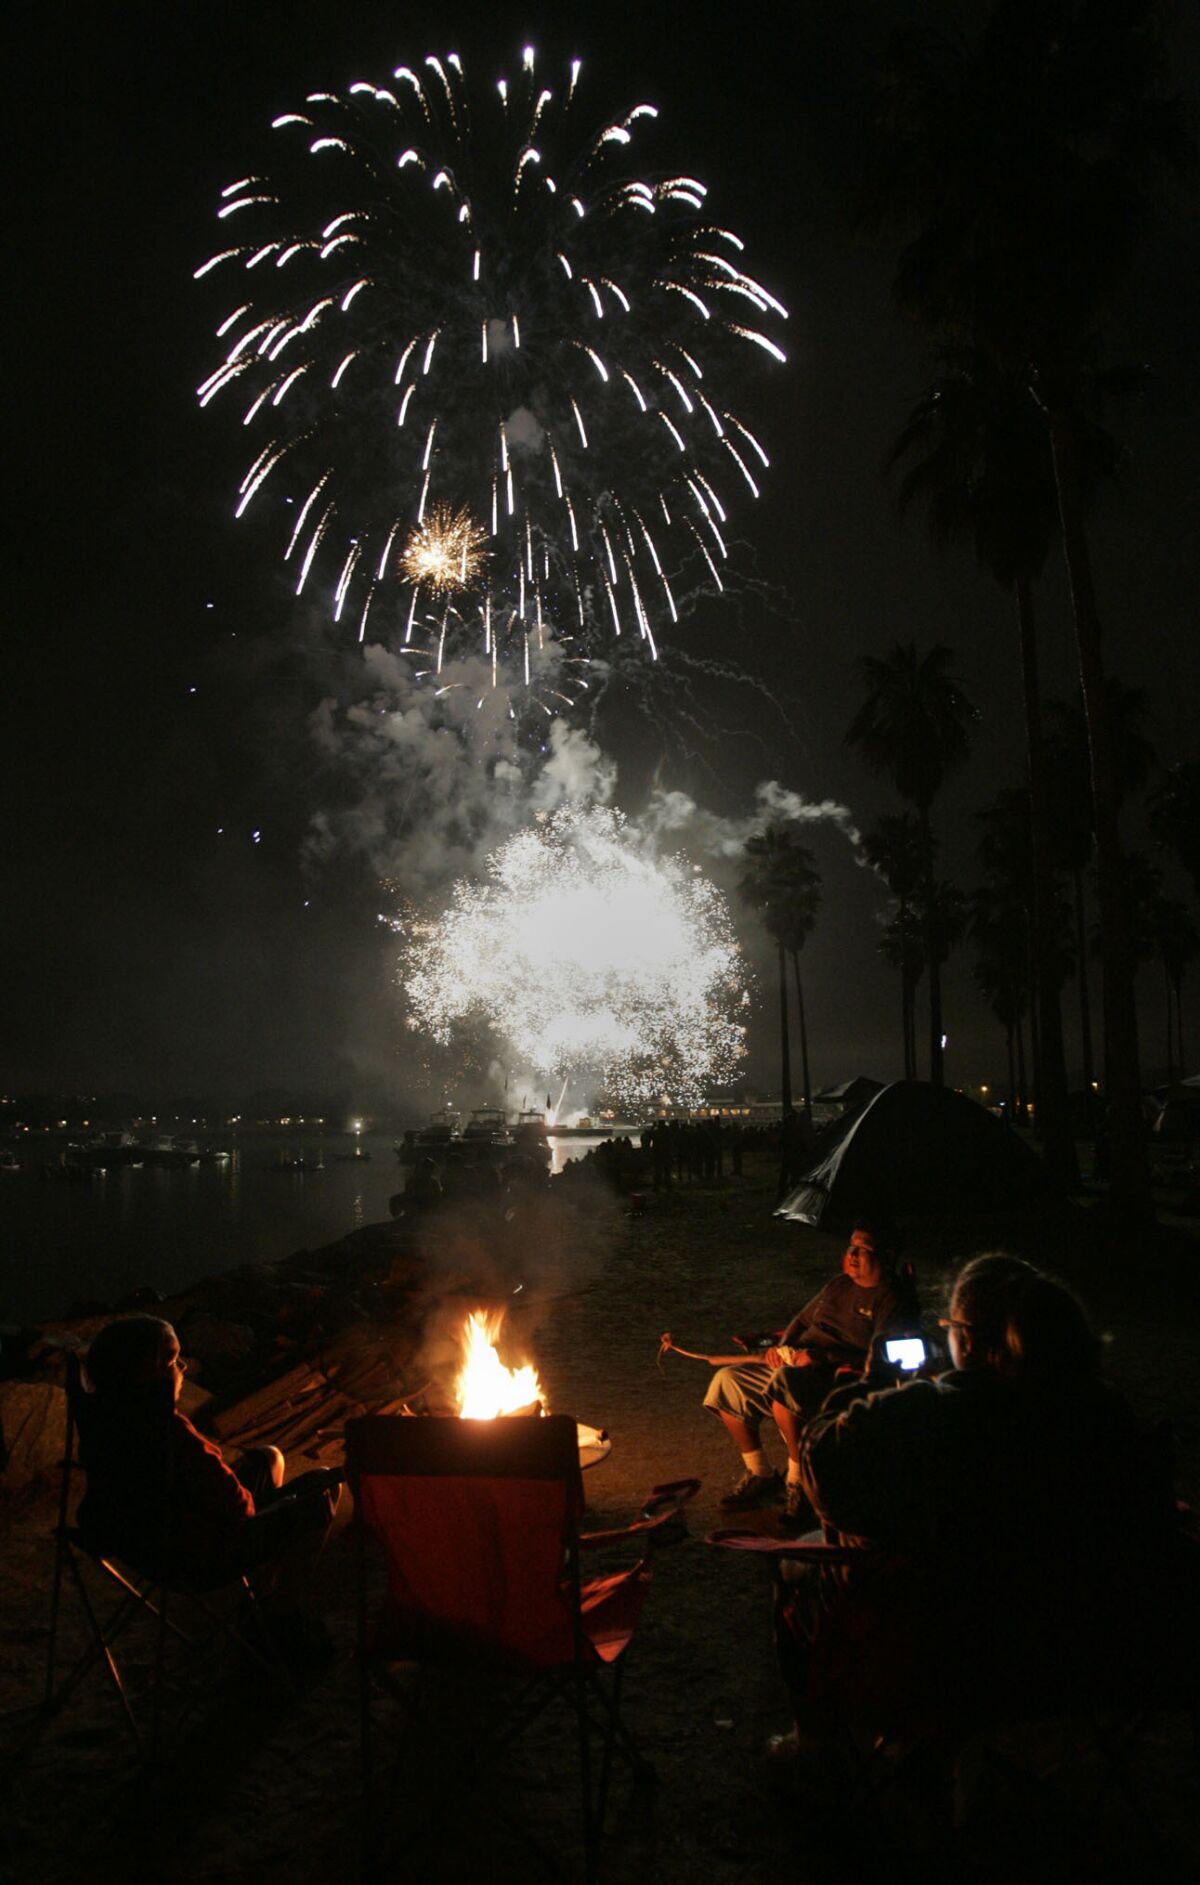 The 2010 fireworks show in Mission Bay